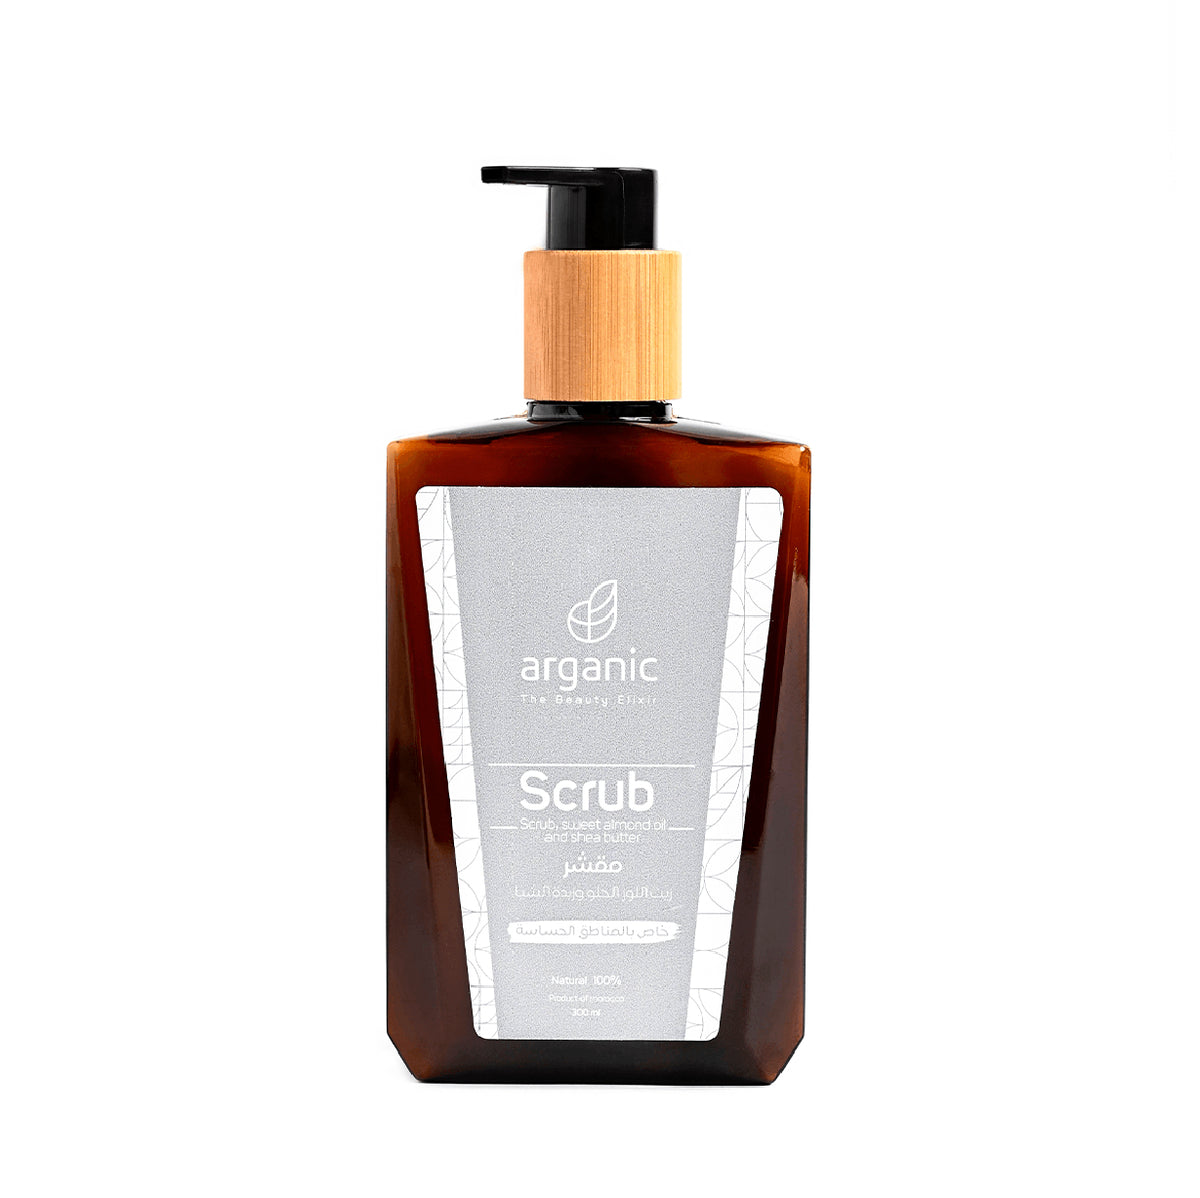 Arganic body scrub in brown bottle with pump on white background